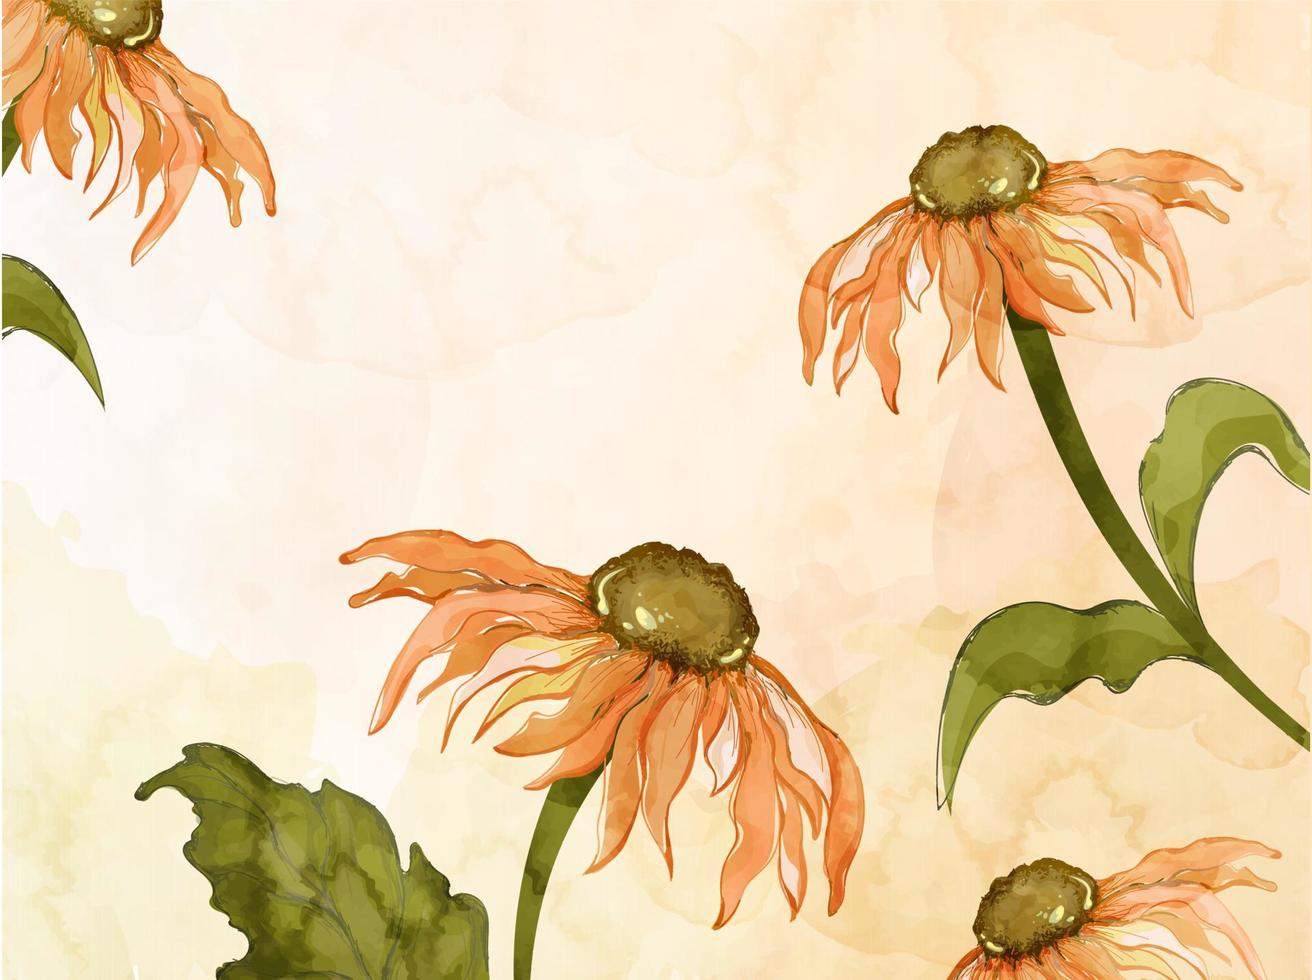 Creative Sunflowers with Leaves Decorated on Orange Watercolor Effect Background. vector